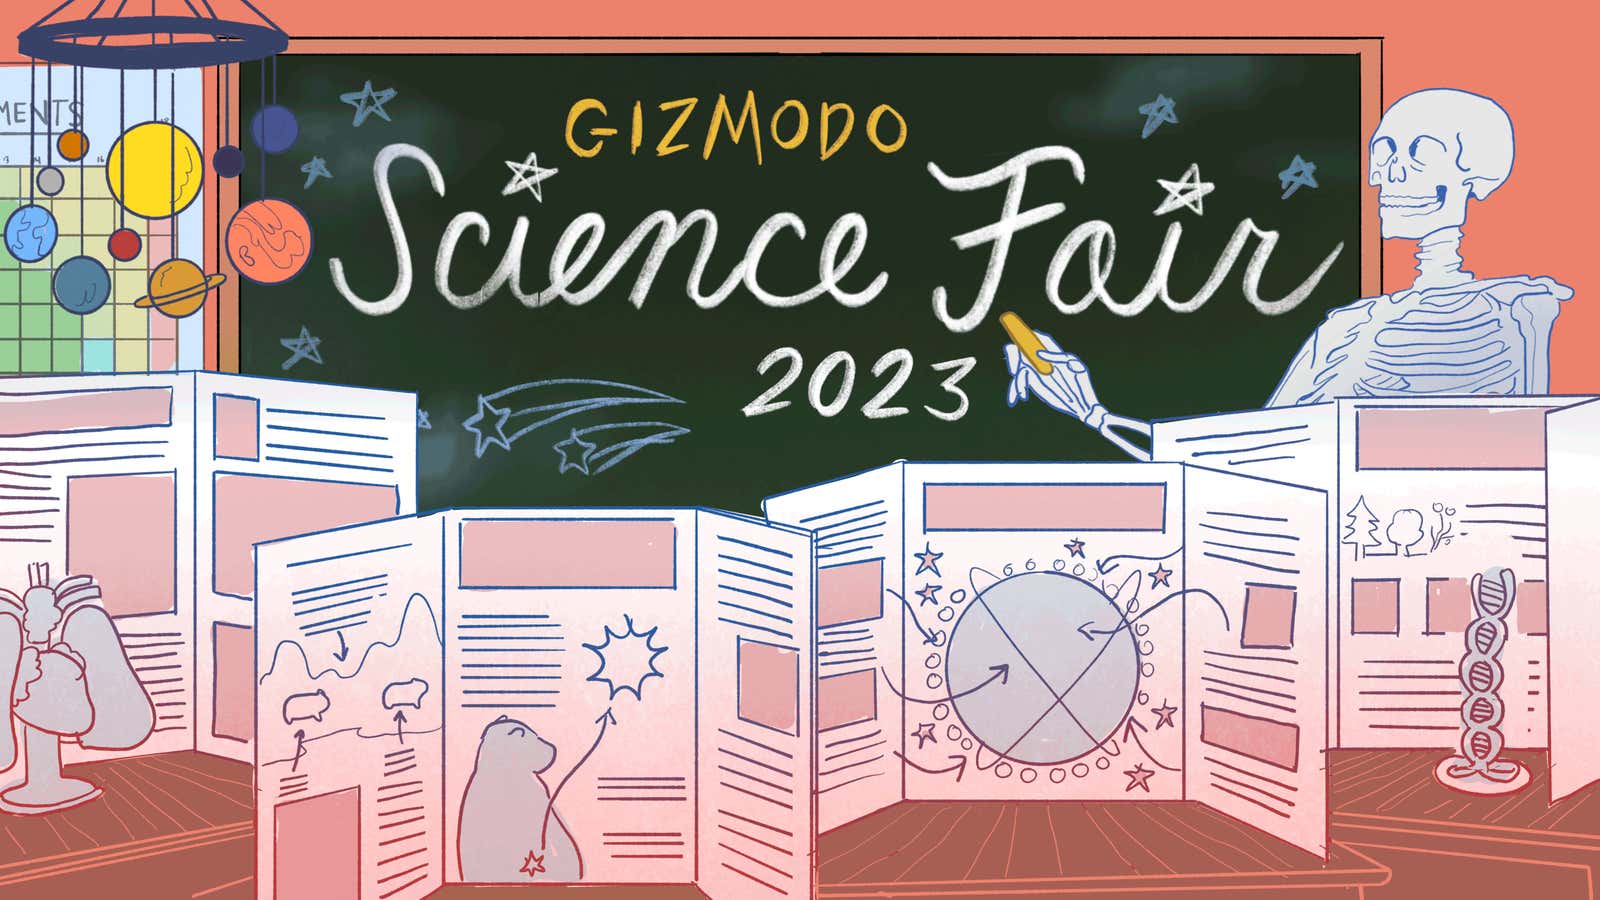 The Winners of the 2023 Gizmodo Science Fair